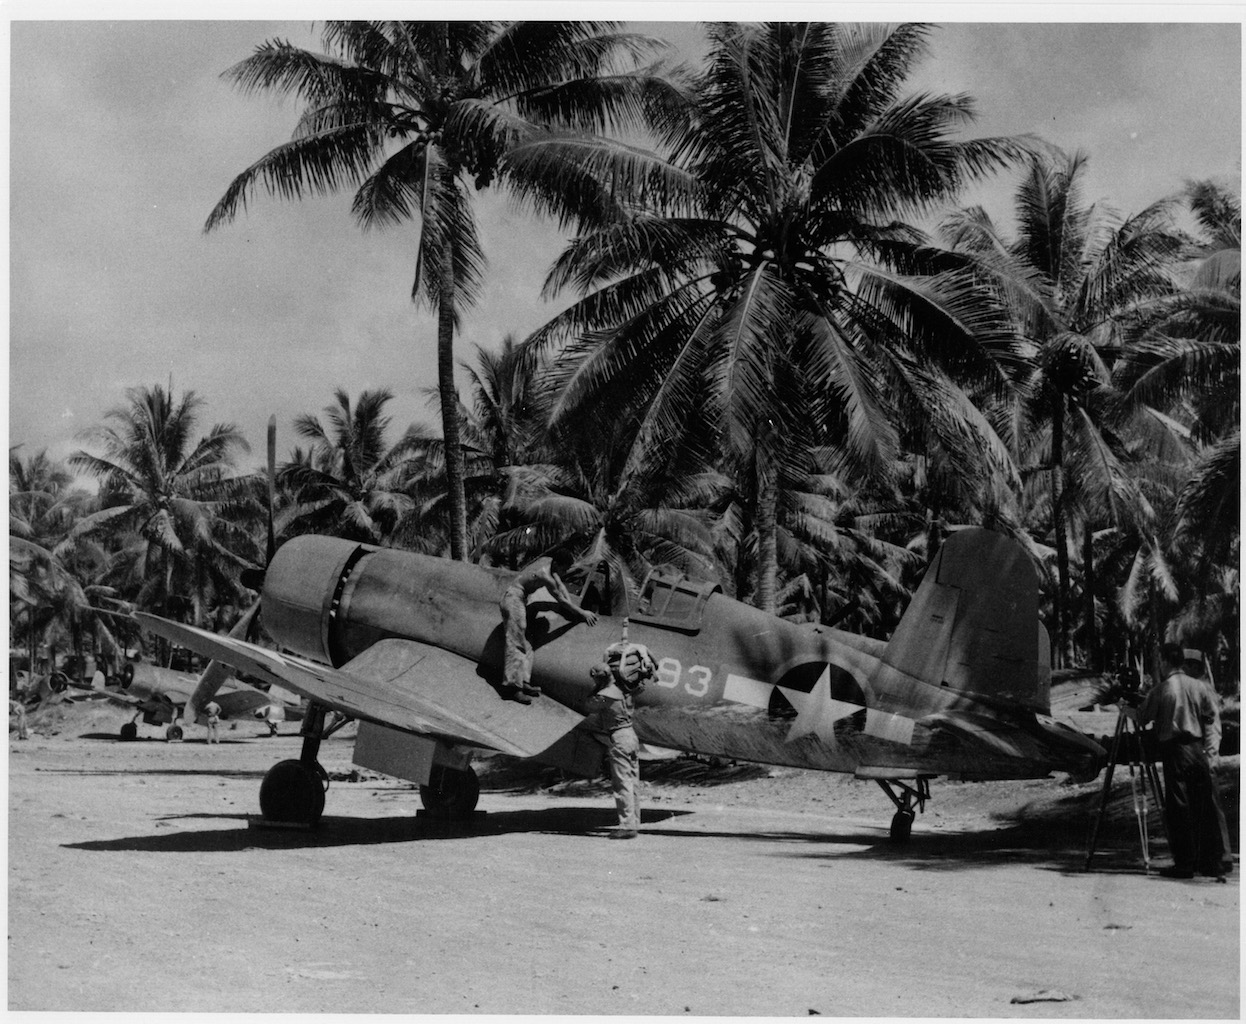 F4U-1 Corsair of 1st Lt Rolland N. Rinabarger of VMF-214, Esprito Santo 1943. ( Photo by Mike Schneider Collection)